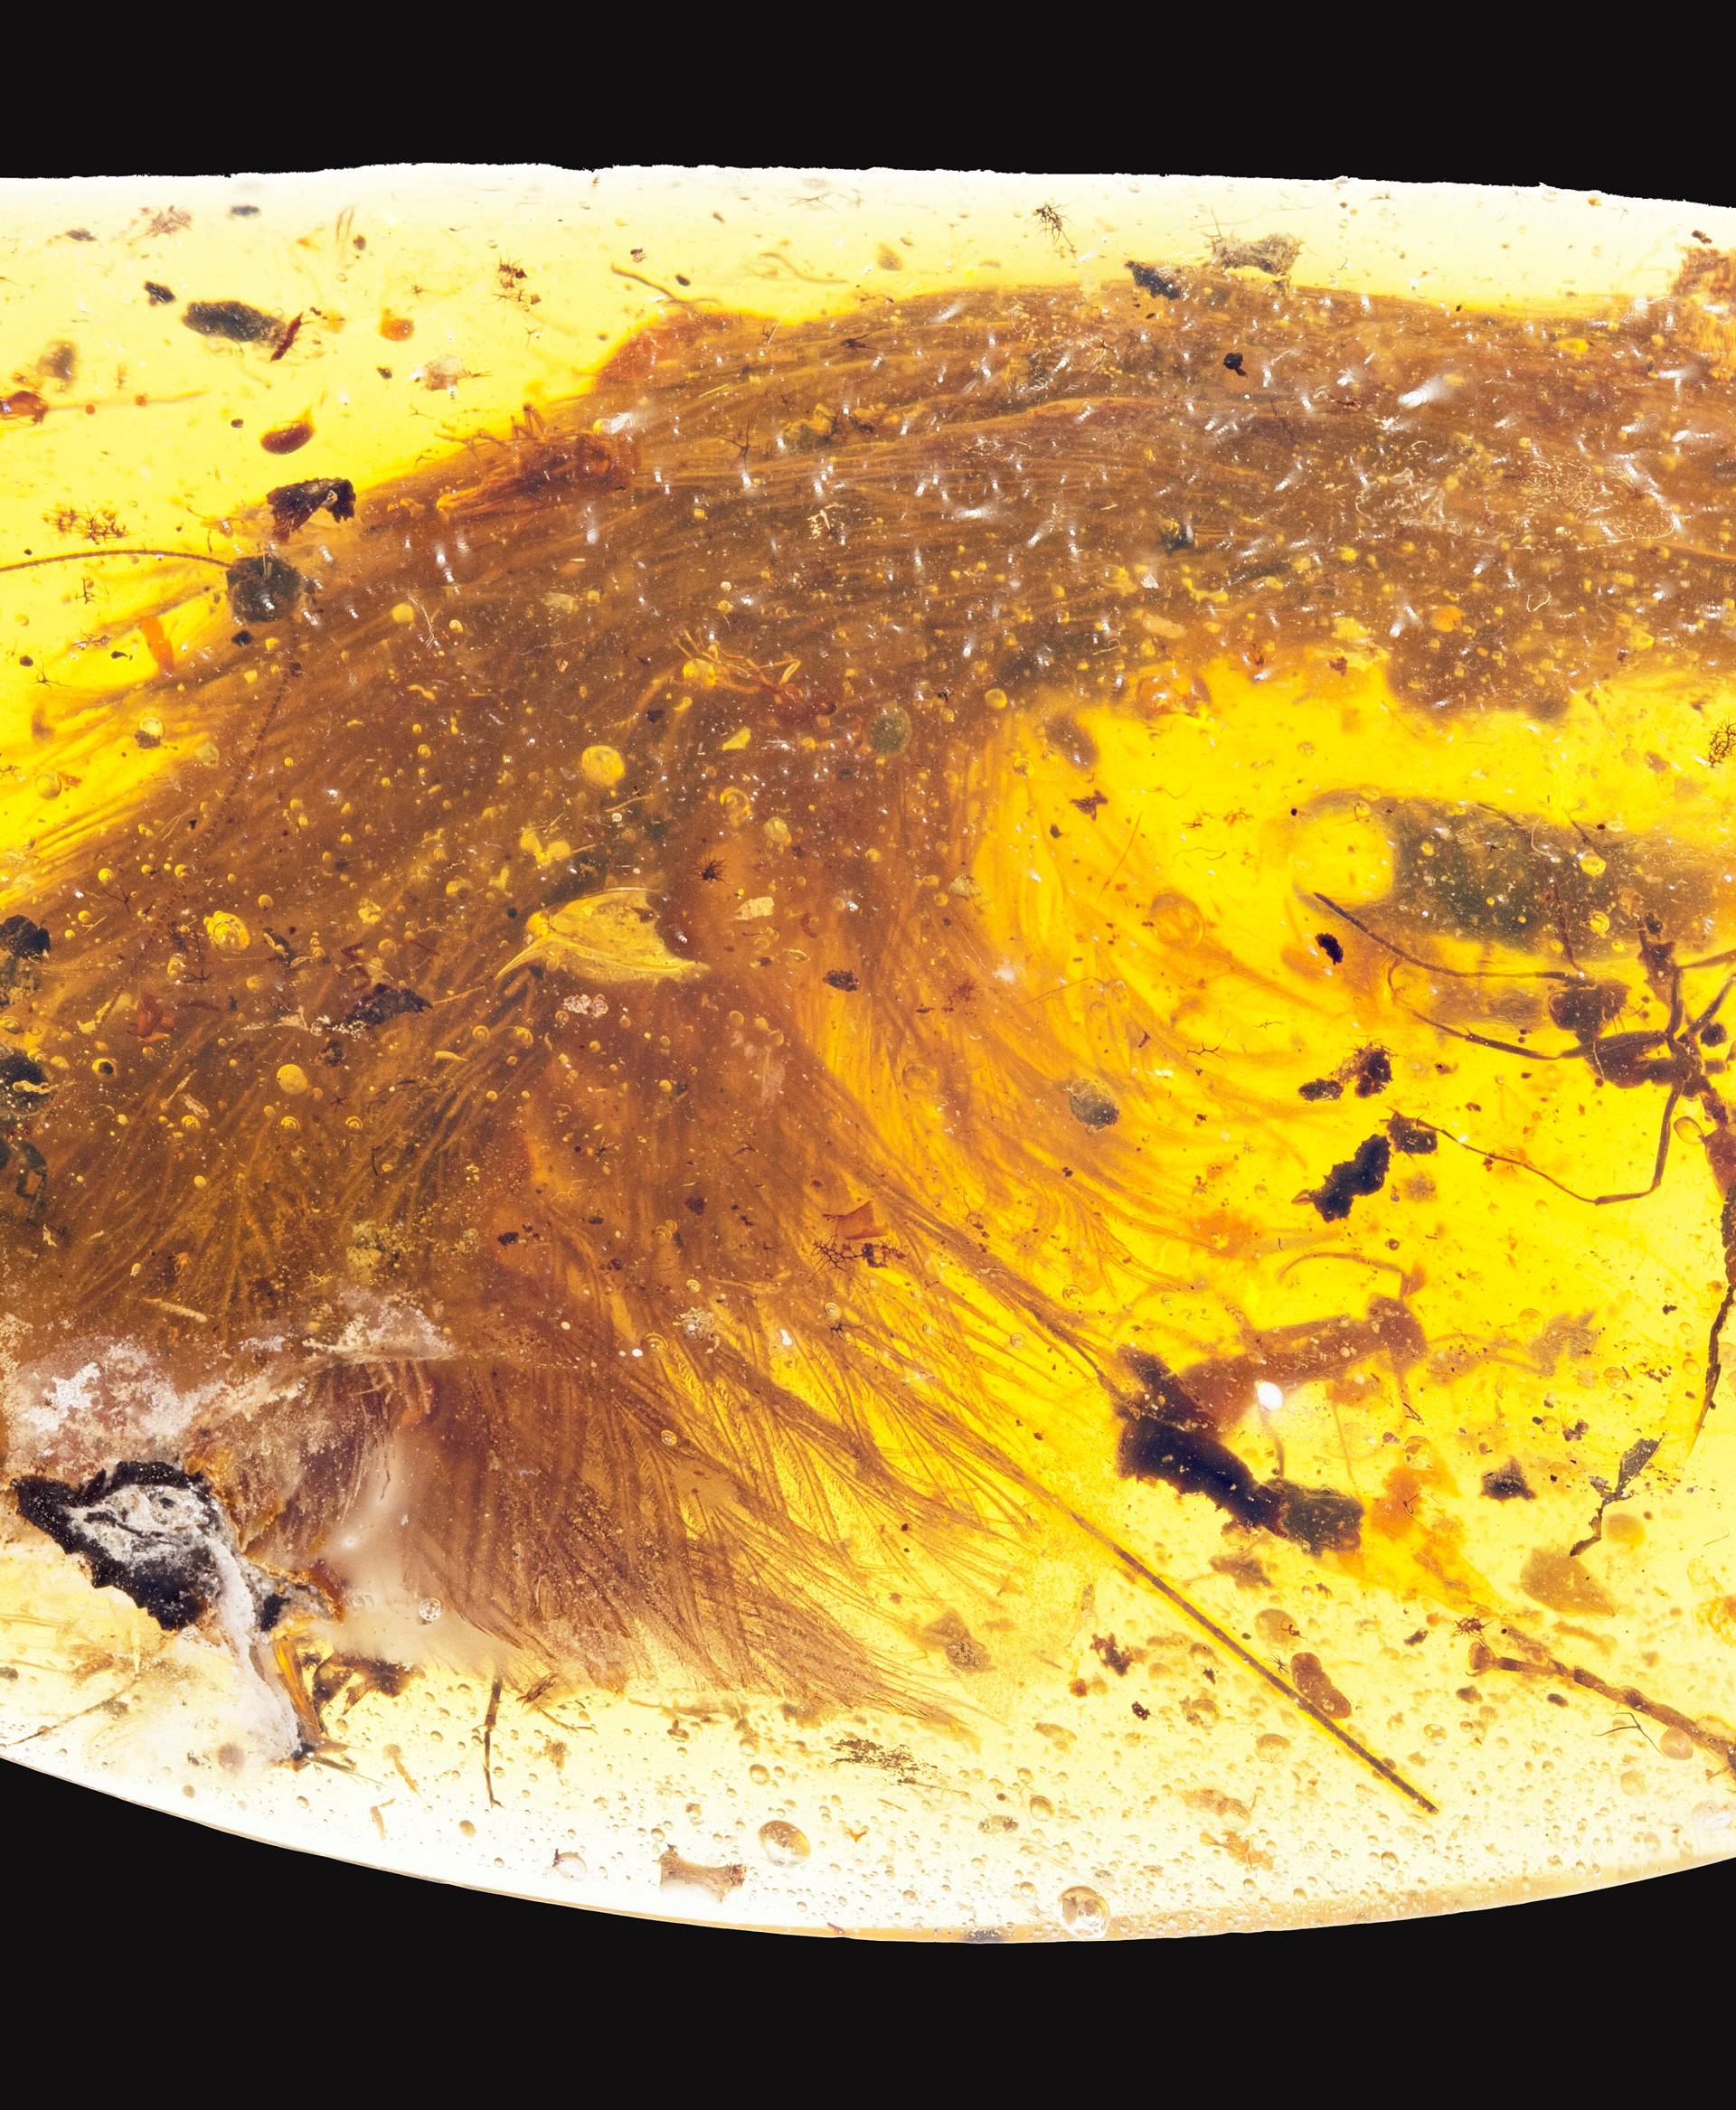 A chunk of amber - fossilized resin - spotted by a Chinese scientist in a market in Myitkyina, Myanmar last year shows the tip of a preserved dinosaur tail section